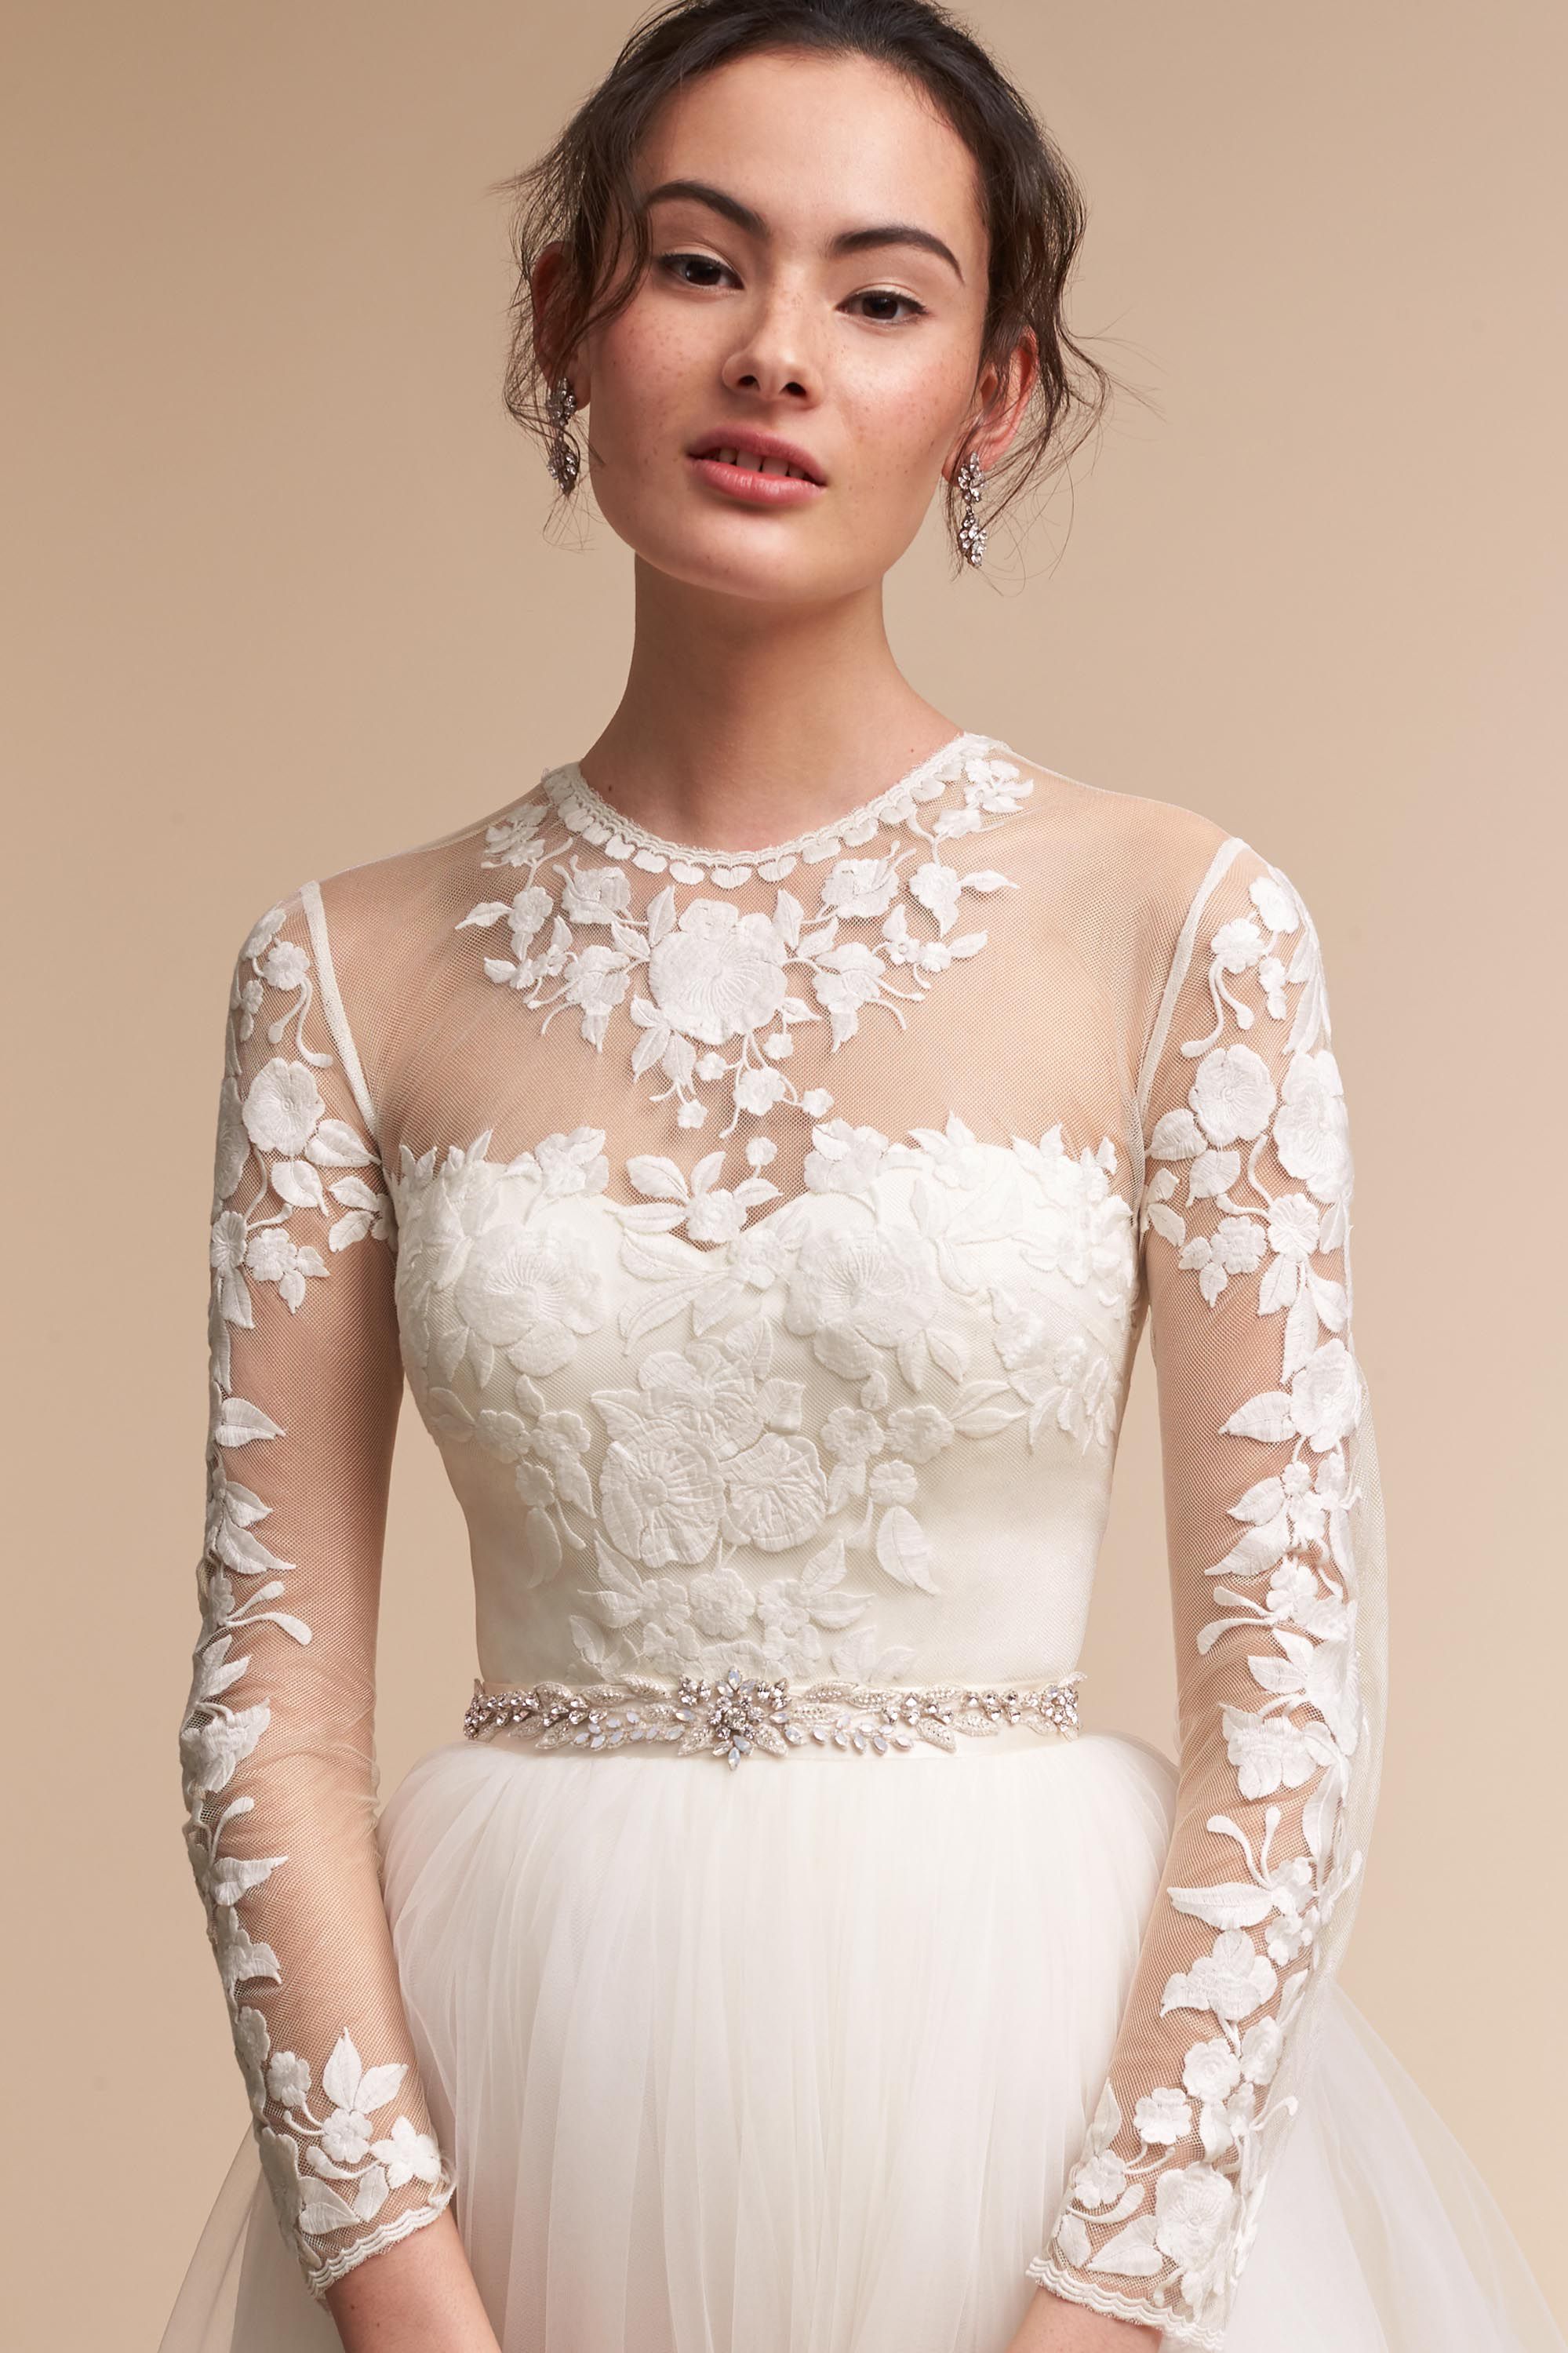 Gorgeous Wedding Dress with Bodysuit and Skirt - Bridal Separates